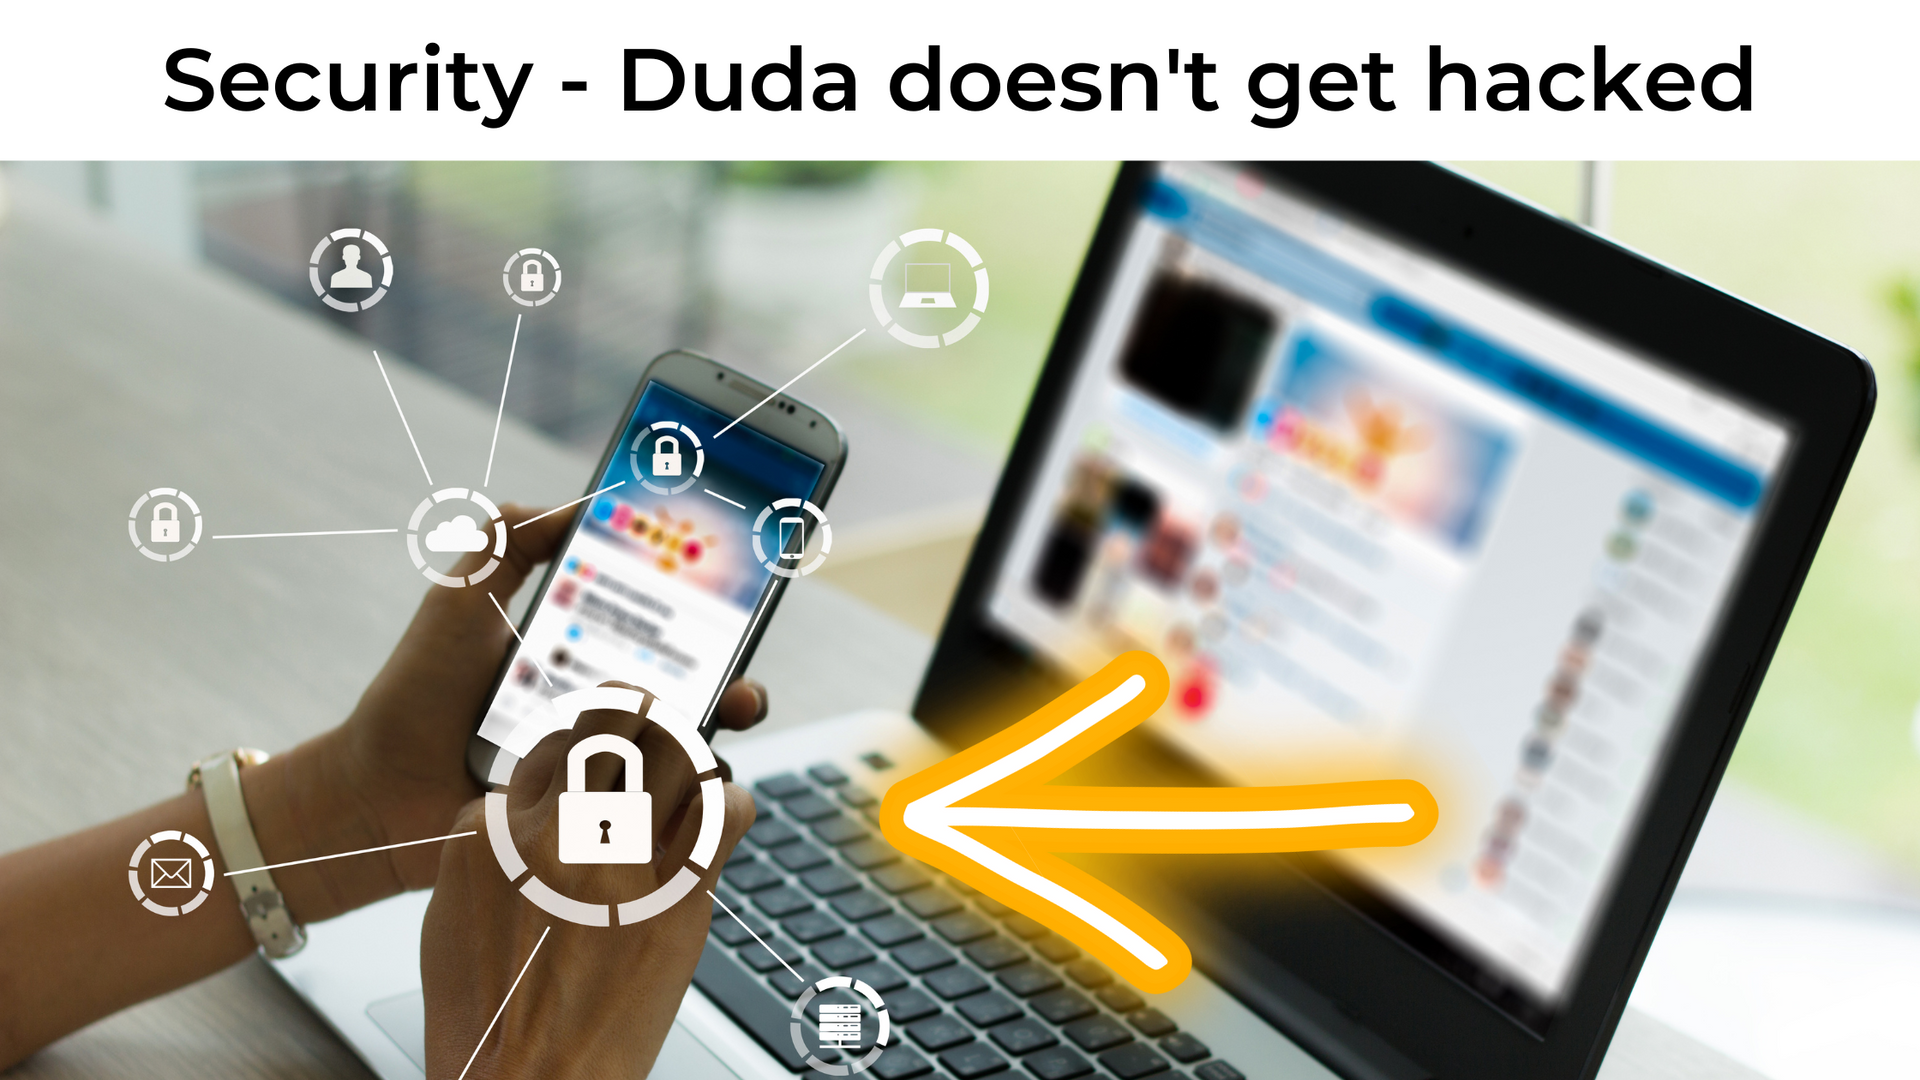 Security - Duda doesn't get hacked